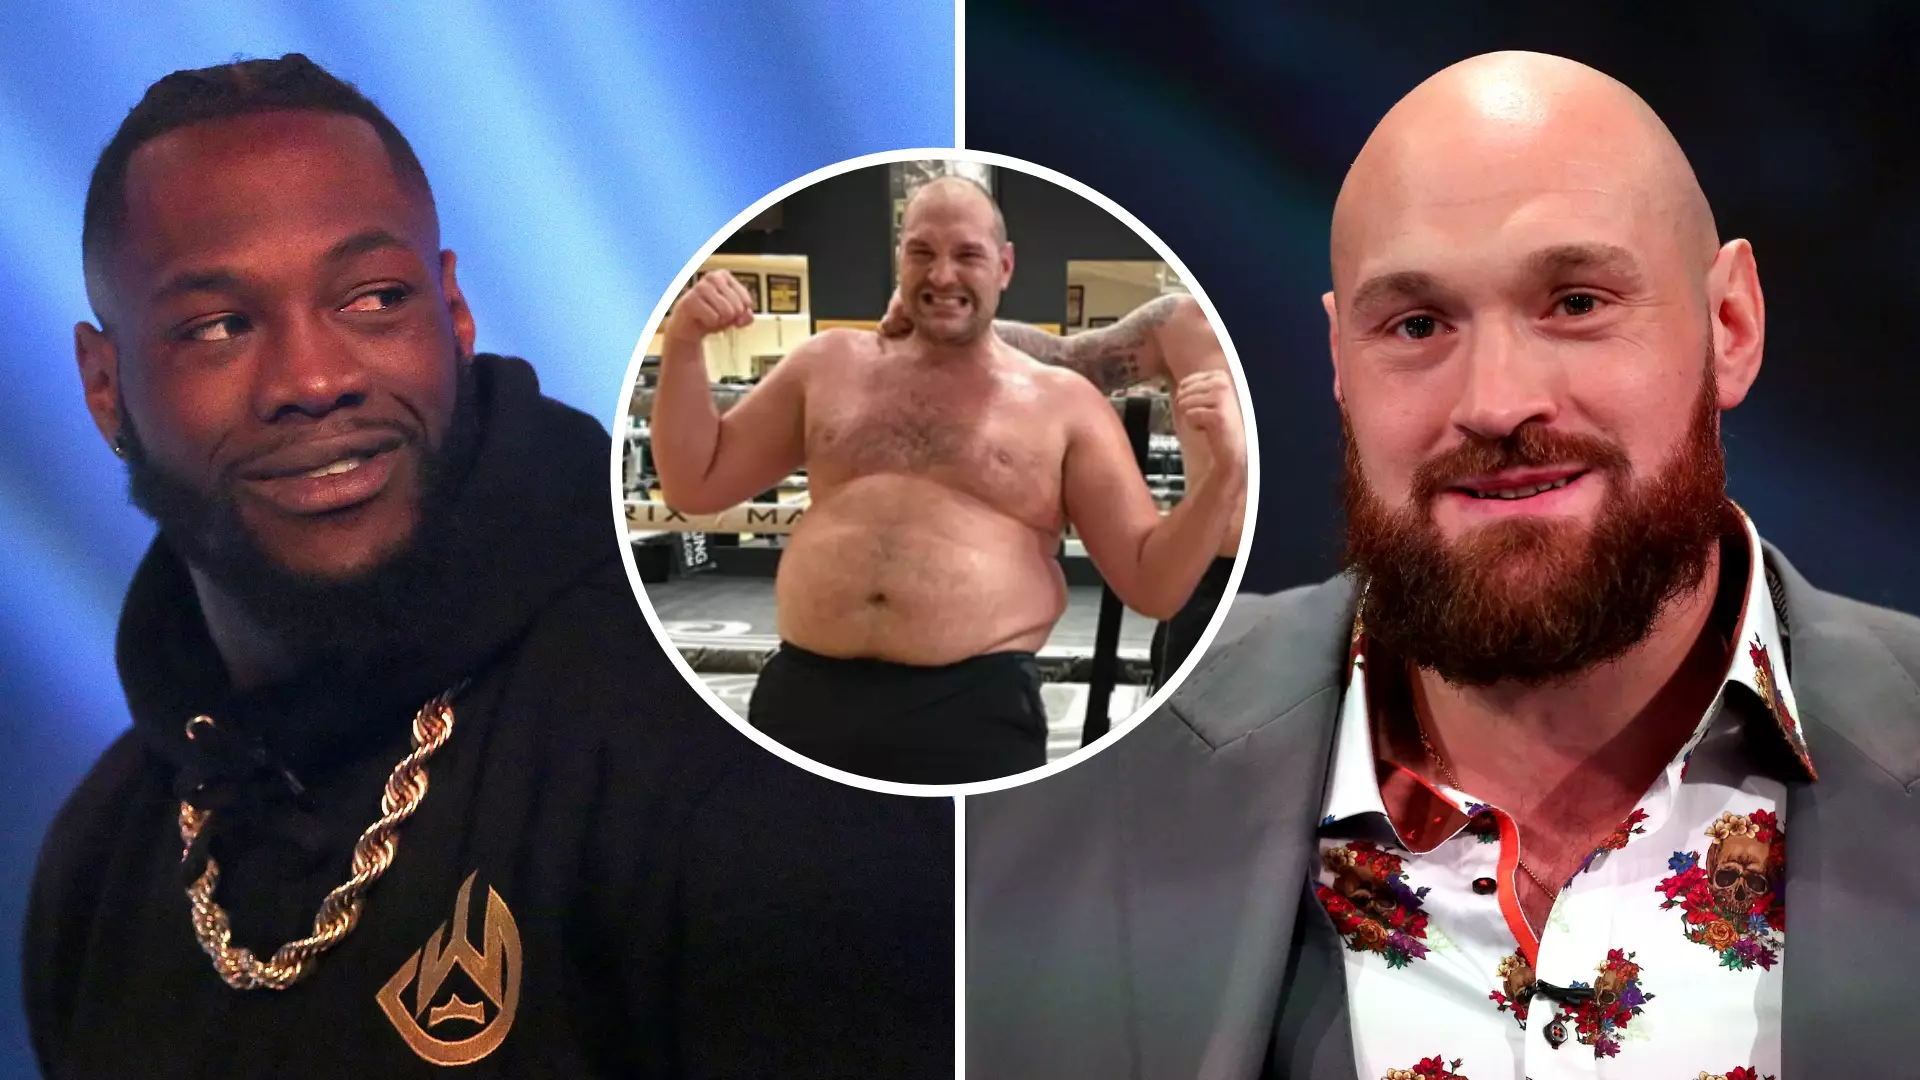 Deontay Wilder Has Slammed Tyson Fury For Using ‘Mental Illness’ To Build His US Profile